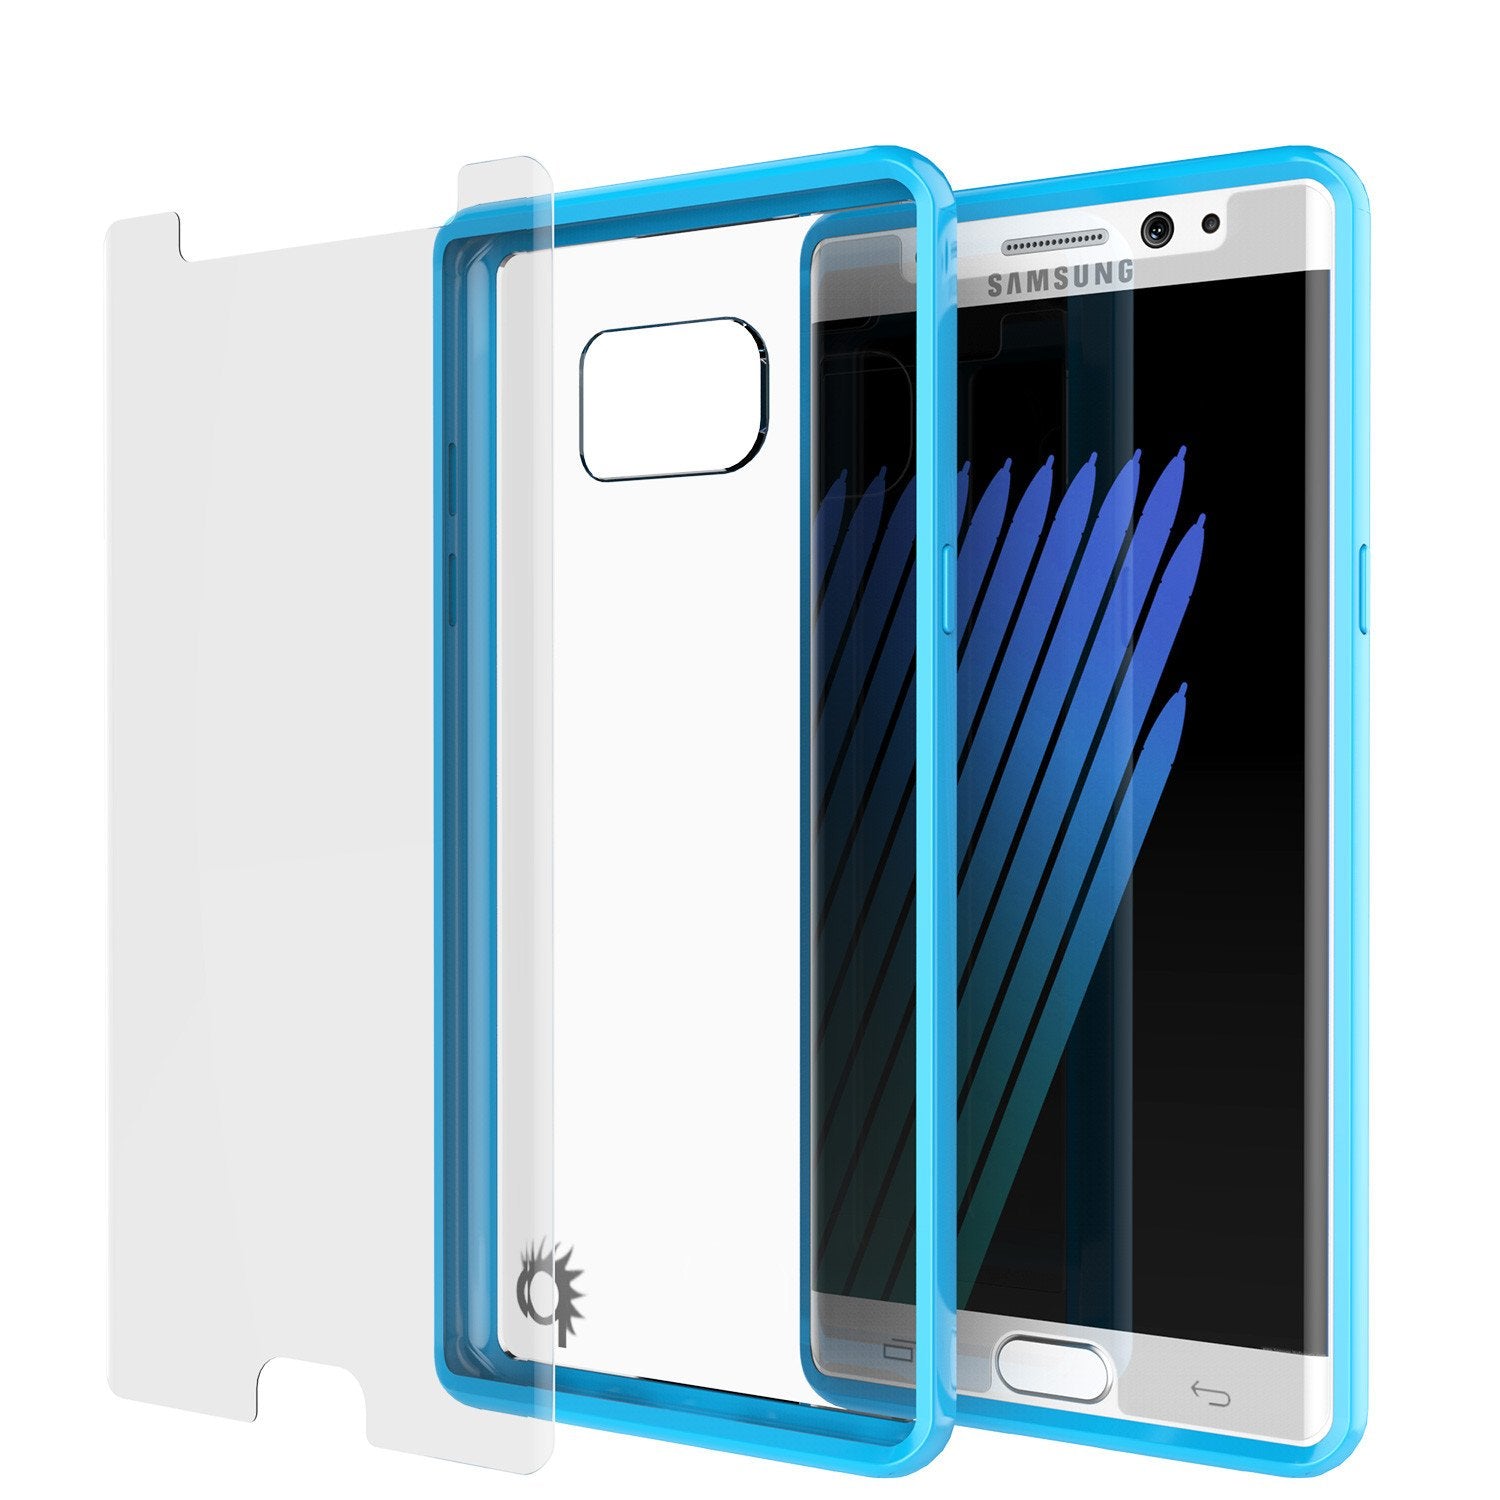 Note 7 Case Punkcase® LUCID 2.0 Light Blue Series w/ PUNK SHIELD Screen Protector | Ultra Fit